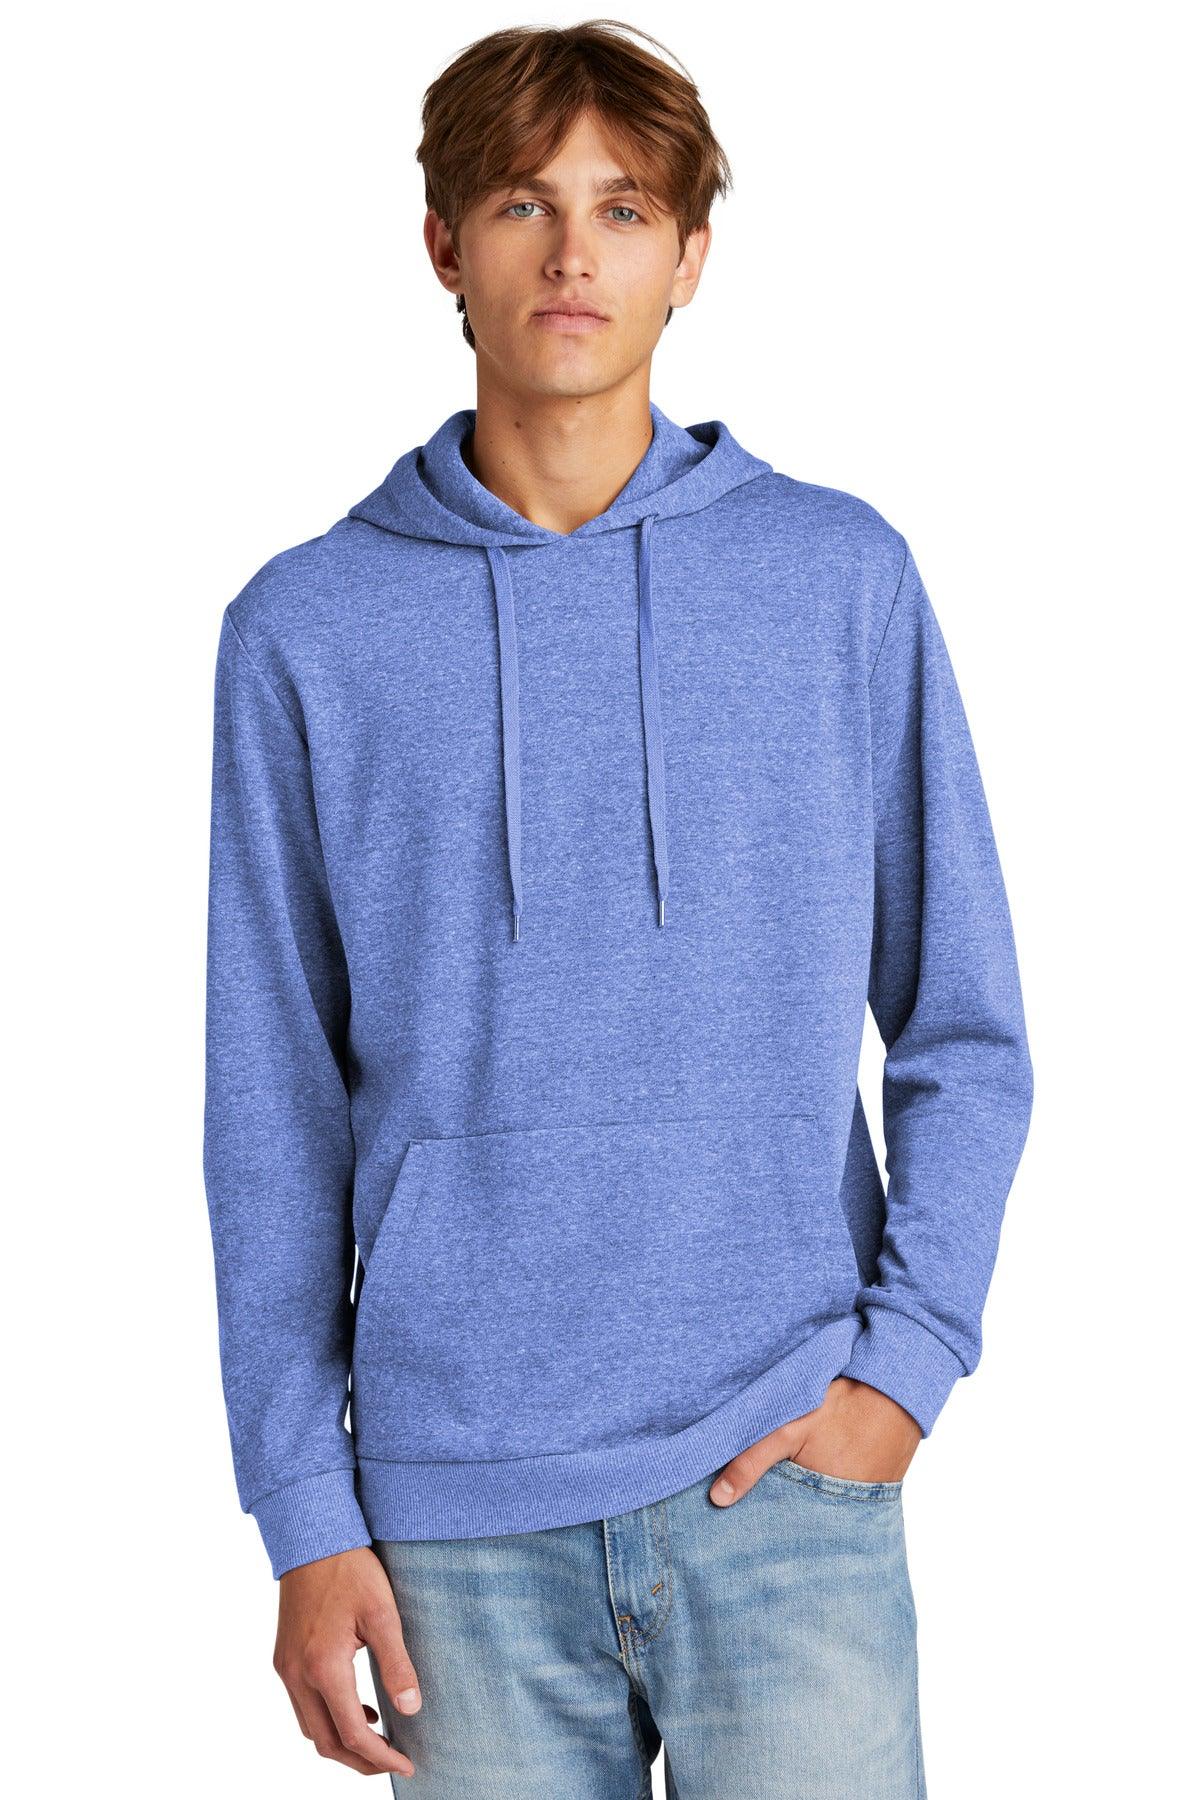 District Perfect Tri Fleece Pullover Hoodie DT1300 - Dresses Max